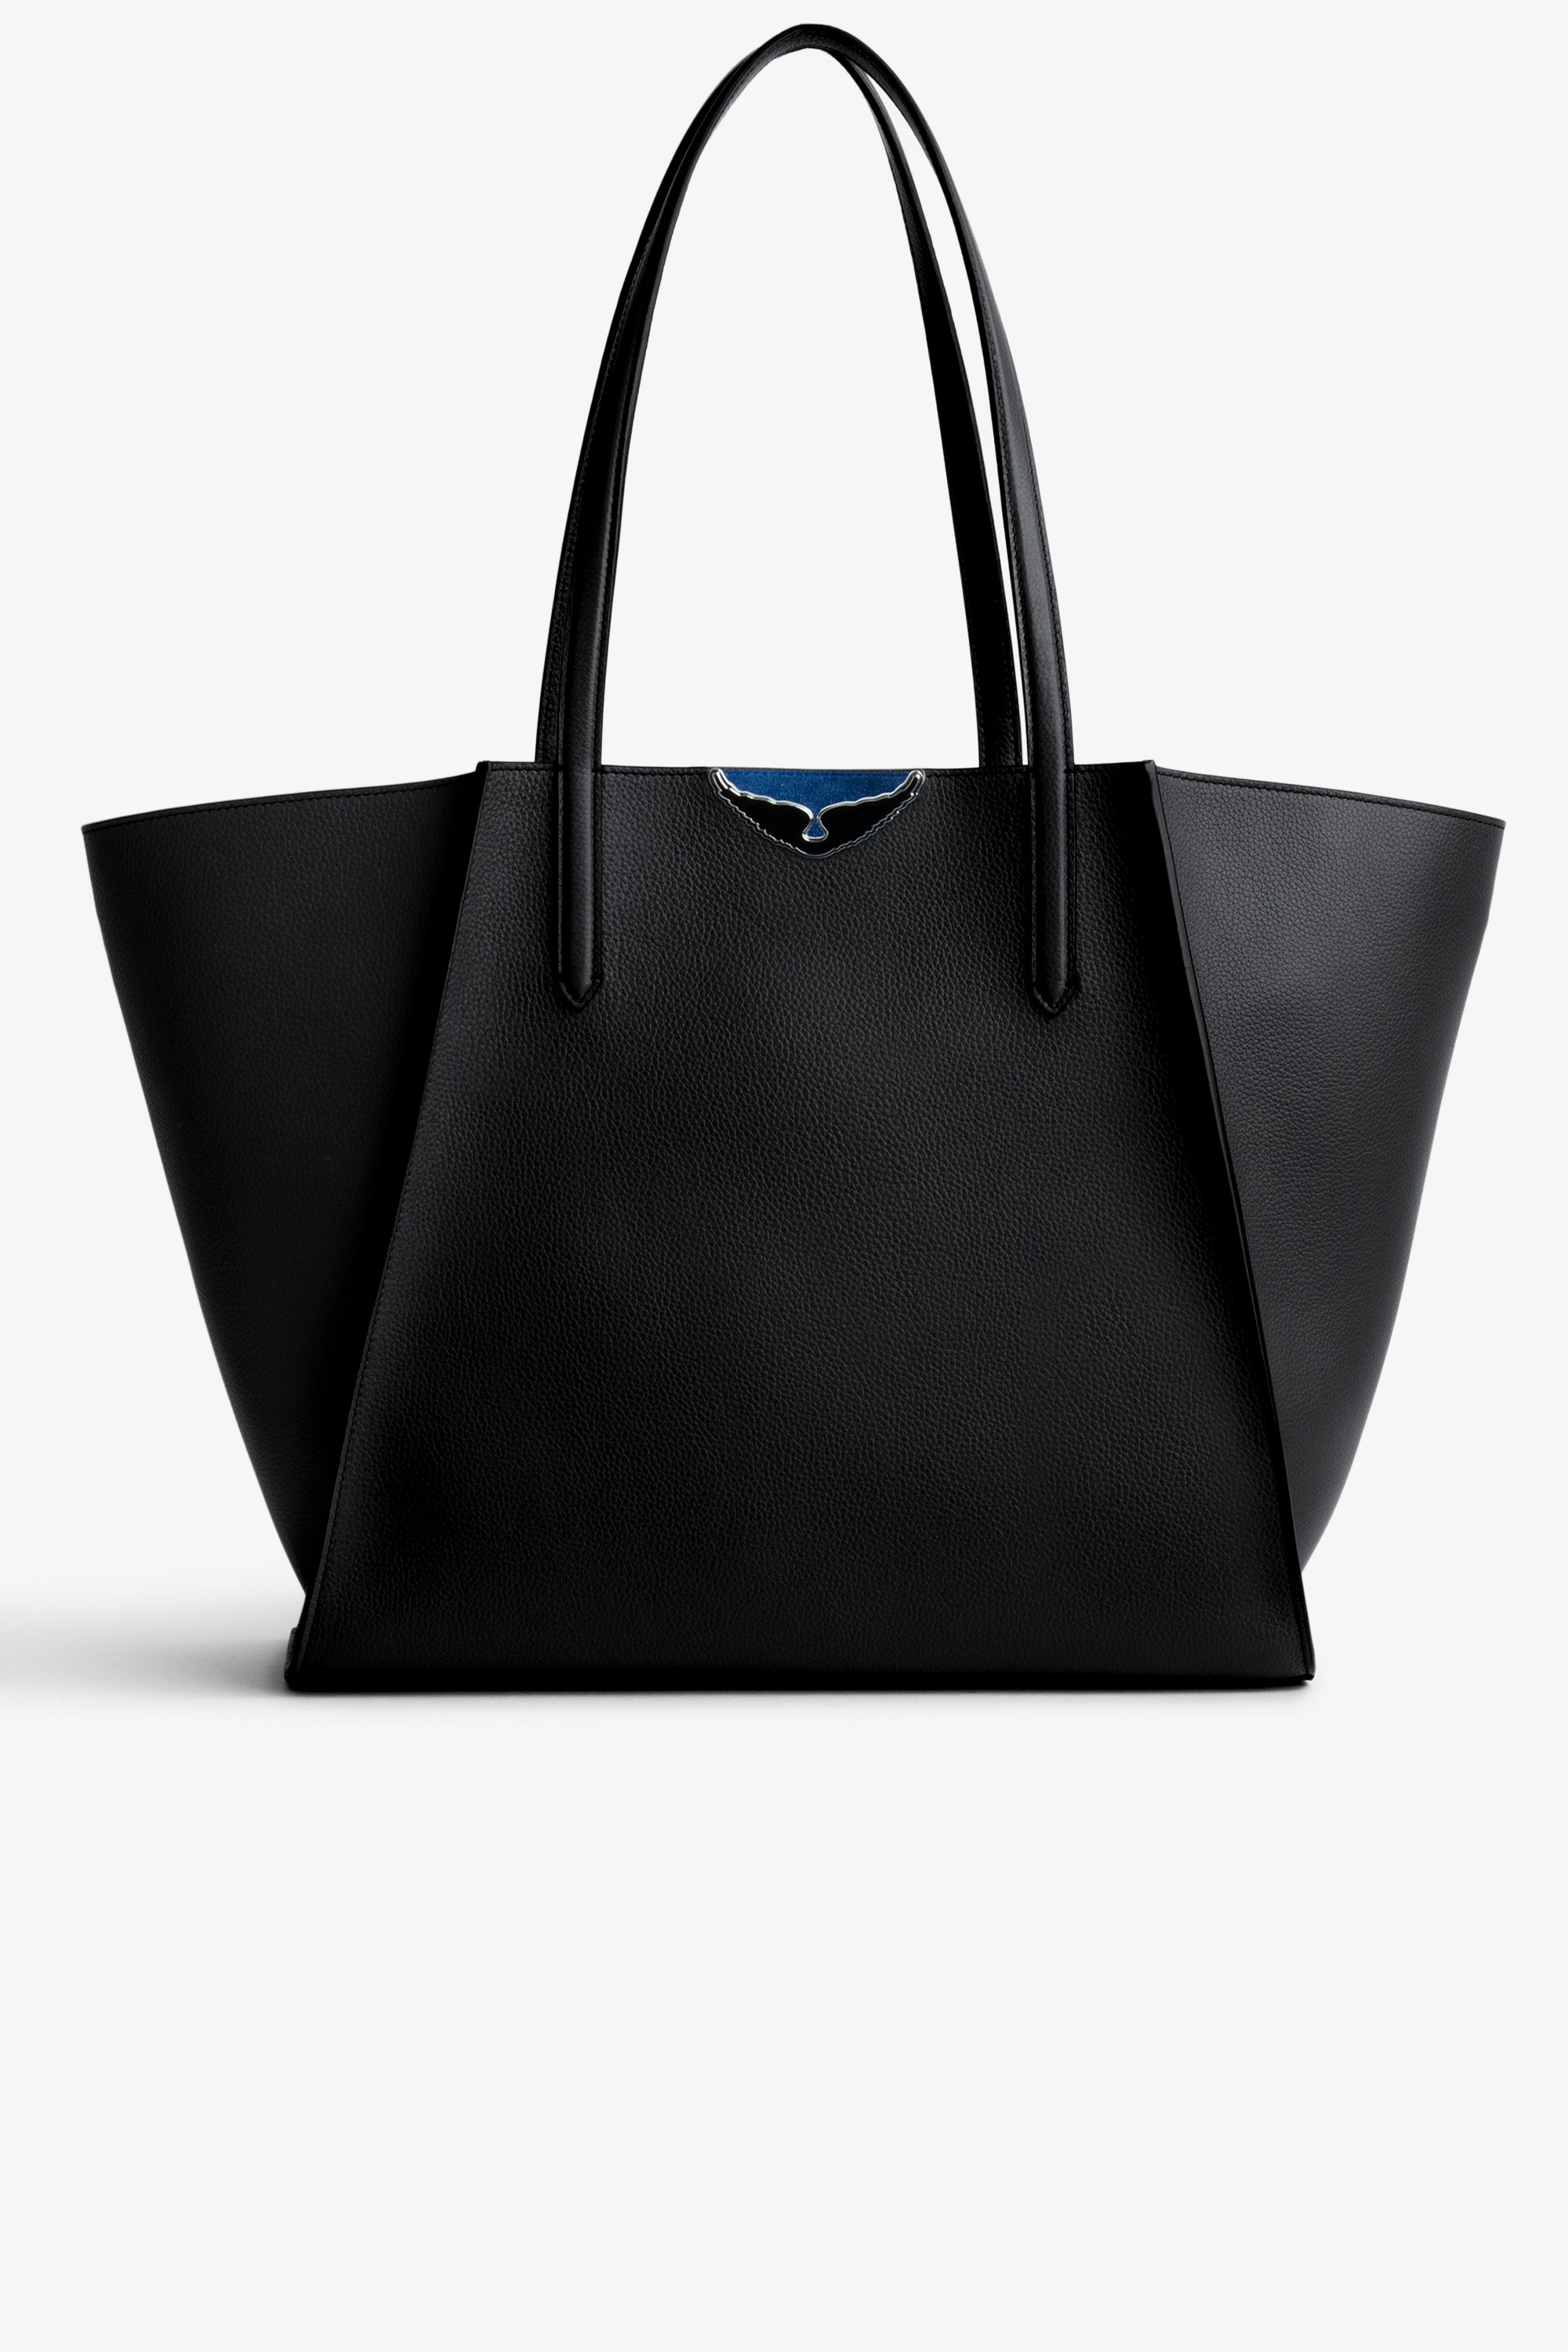 Le Borderline Bag - Women’s tote bag in black grained leather and blue suede with black lacquered wings